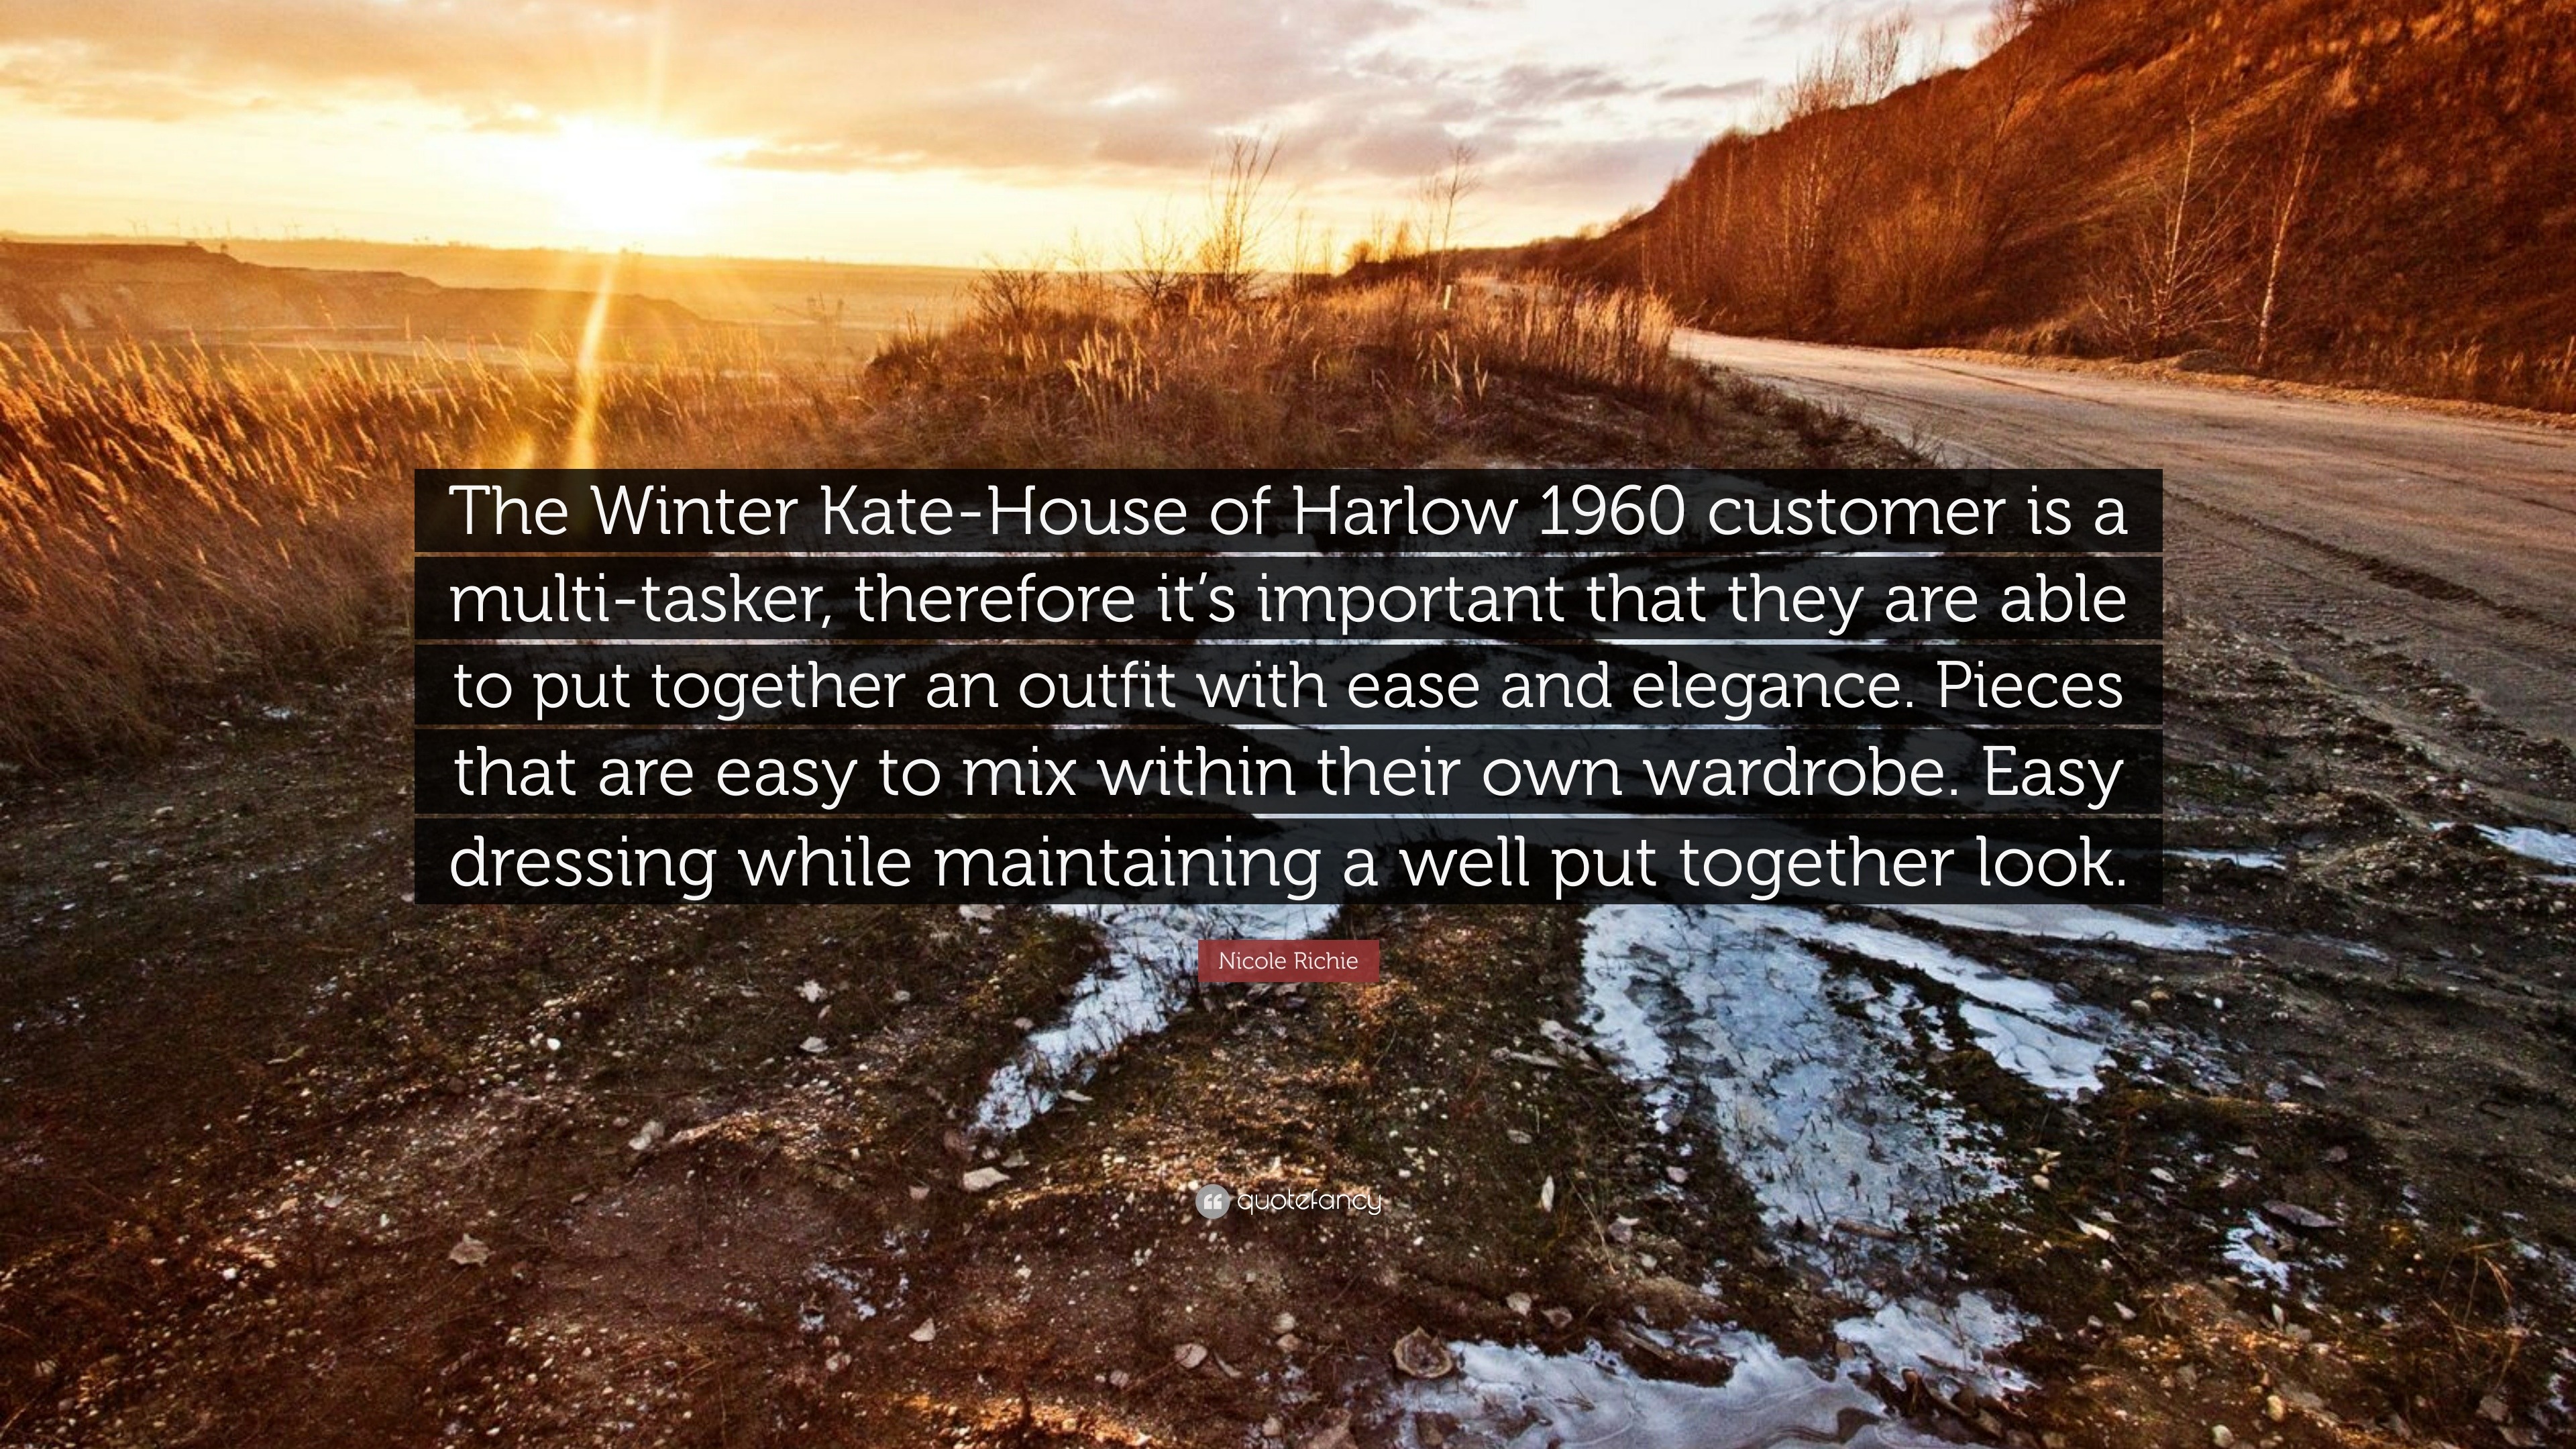 Nicole Richie “The Winter Kate-House of Harlow 1960 customer is a multi-tasker, therefore important that they are able to put toge...”